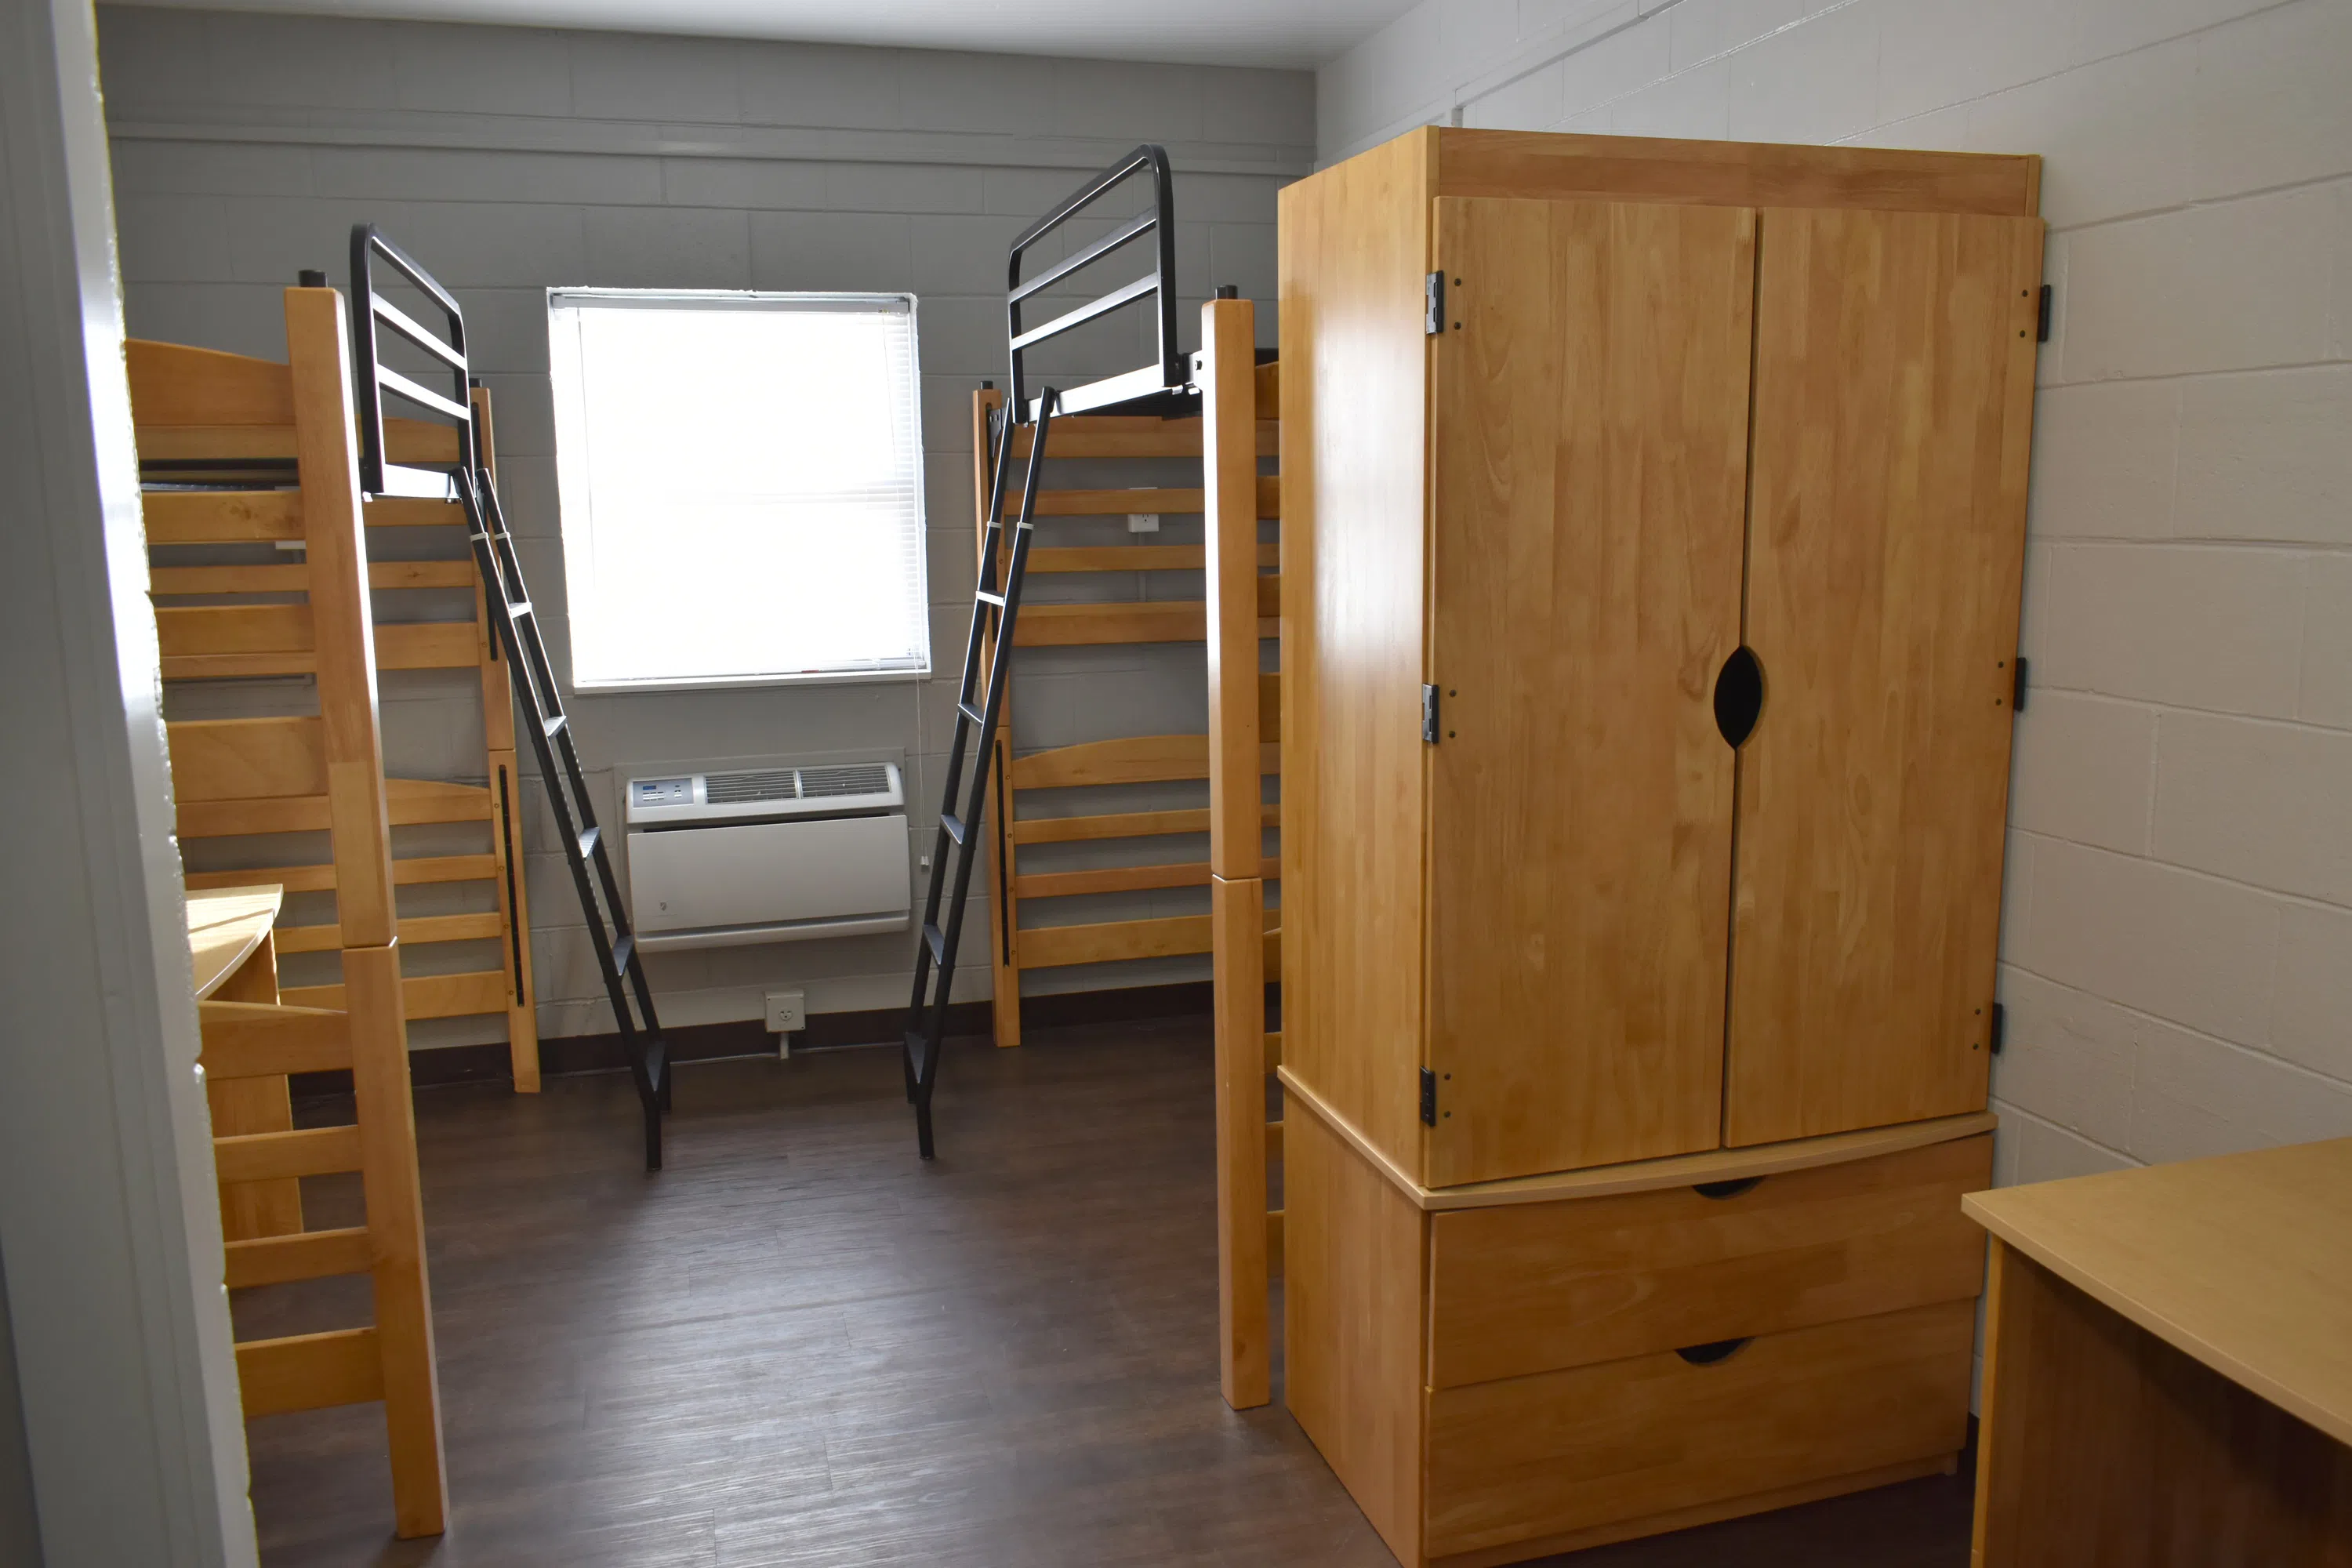 Inside Mitchell Hall with beds and furniture